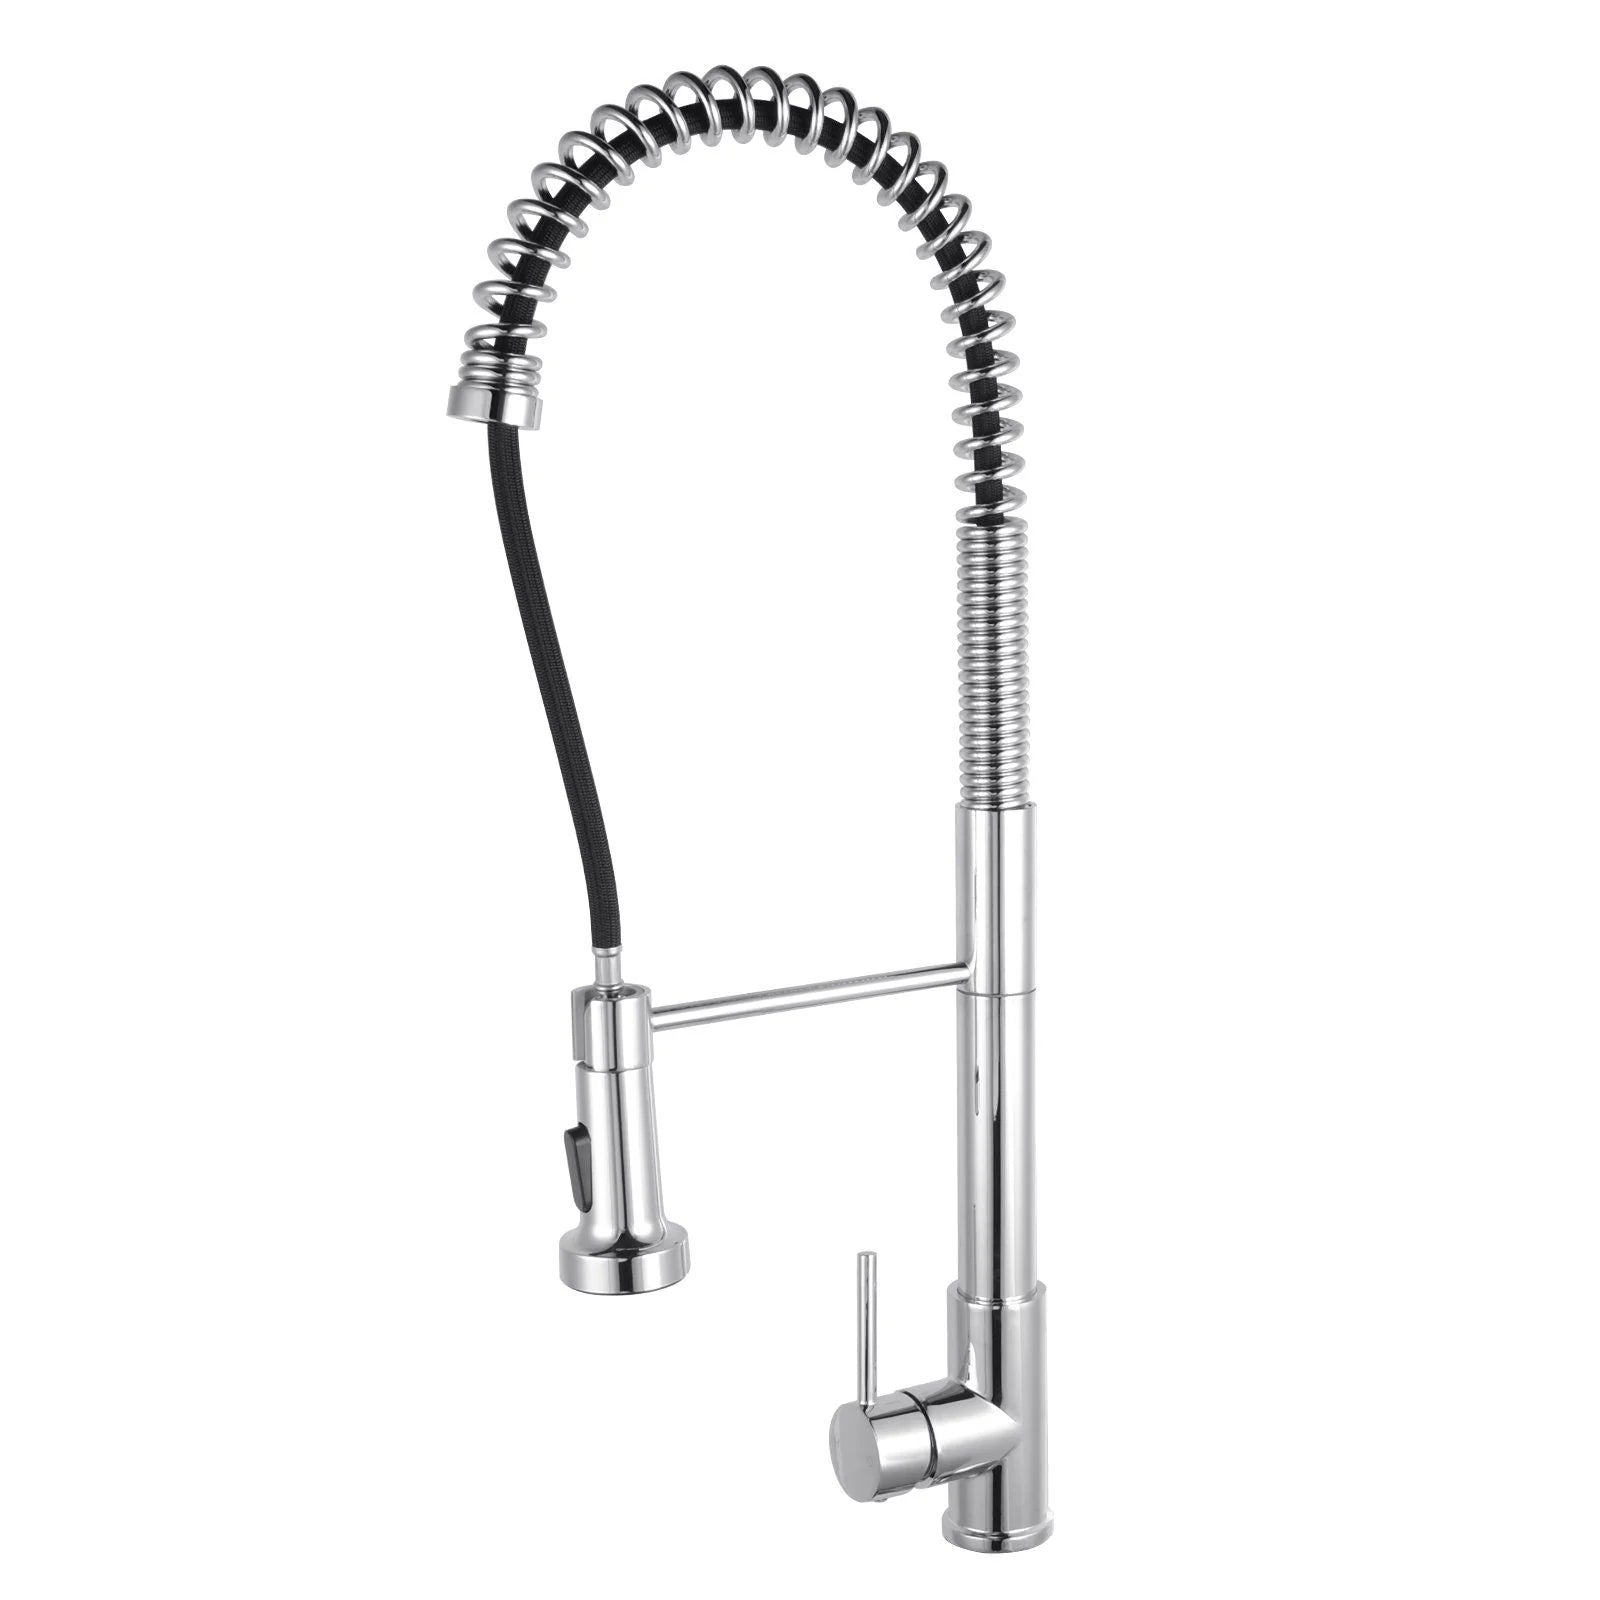 Tall Spring Pull Out Kitchen Sink Mixer Tap: Sleek and functional for modern kitchens-CH1017.KM